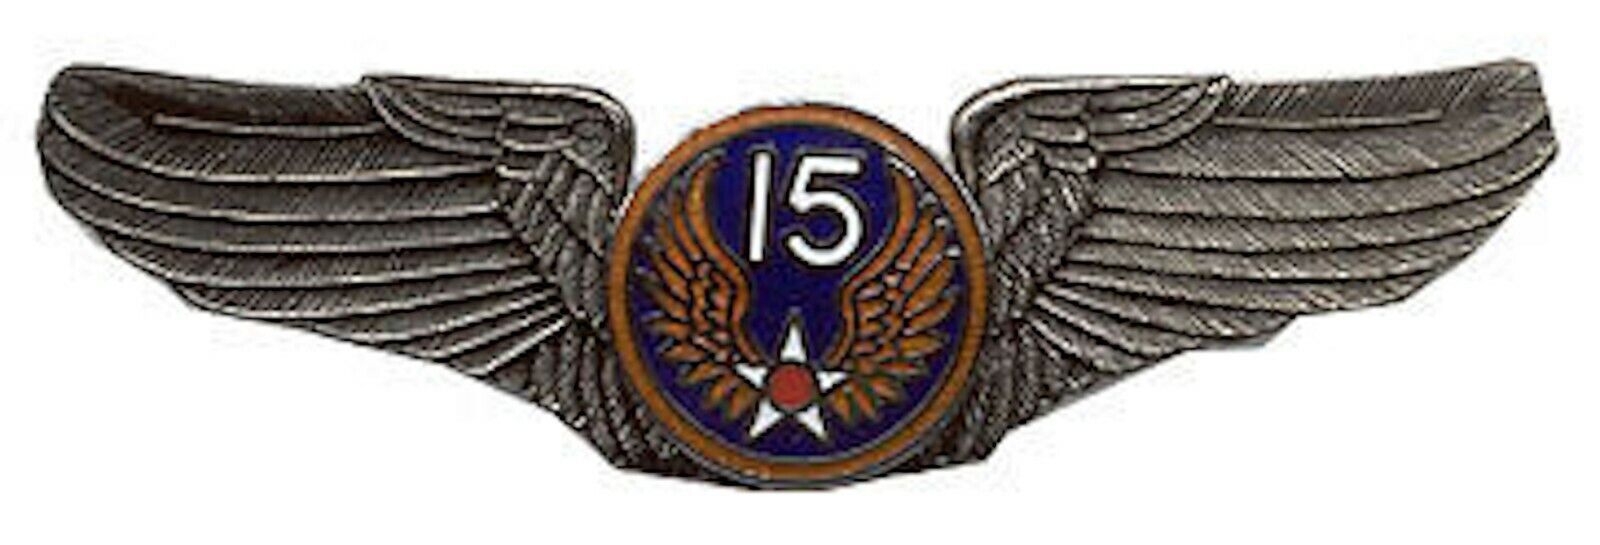 Primary image for 15TH AIR CORPS FORCE  USAF BIG PEWTER WING PIN